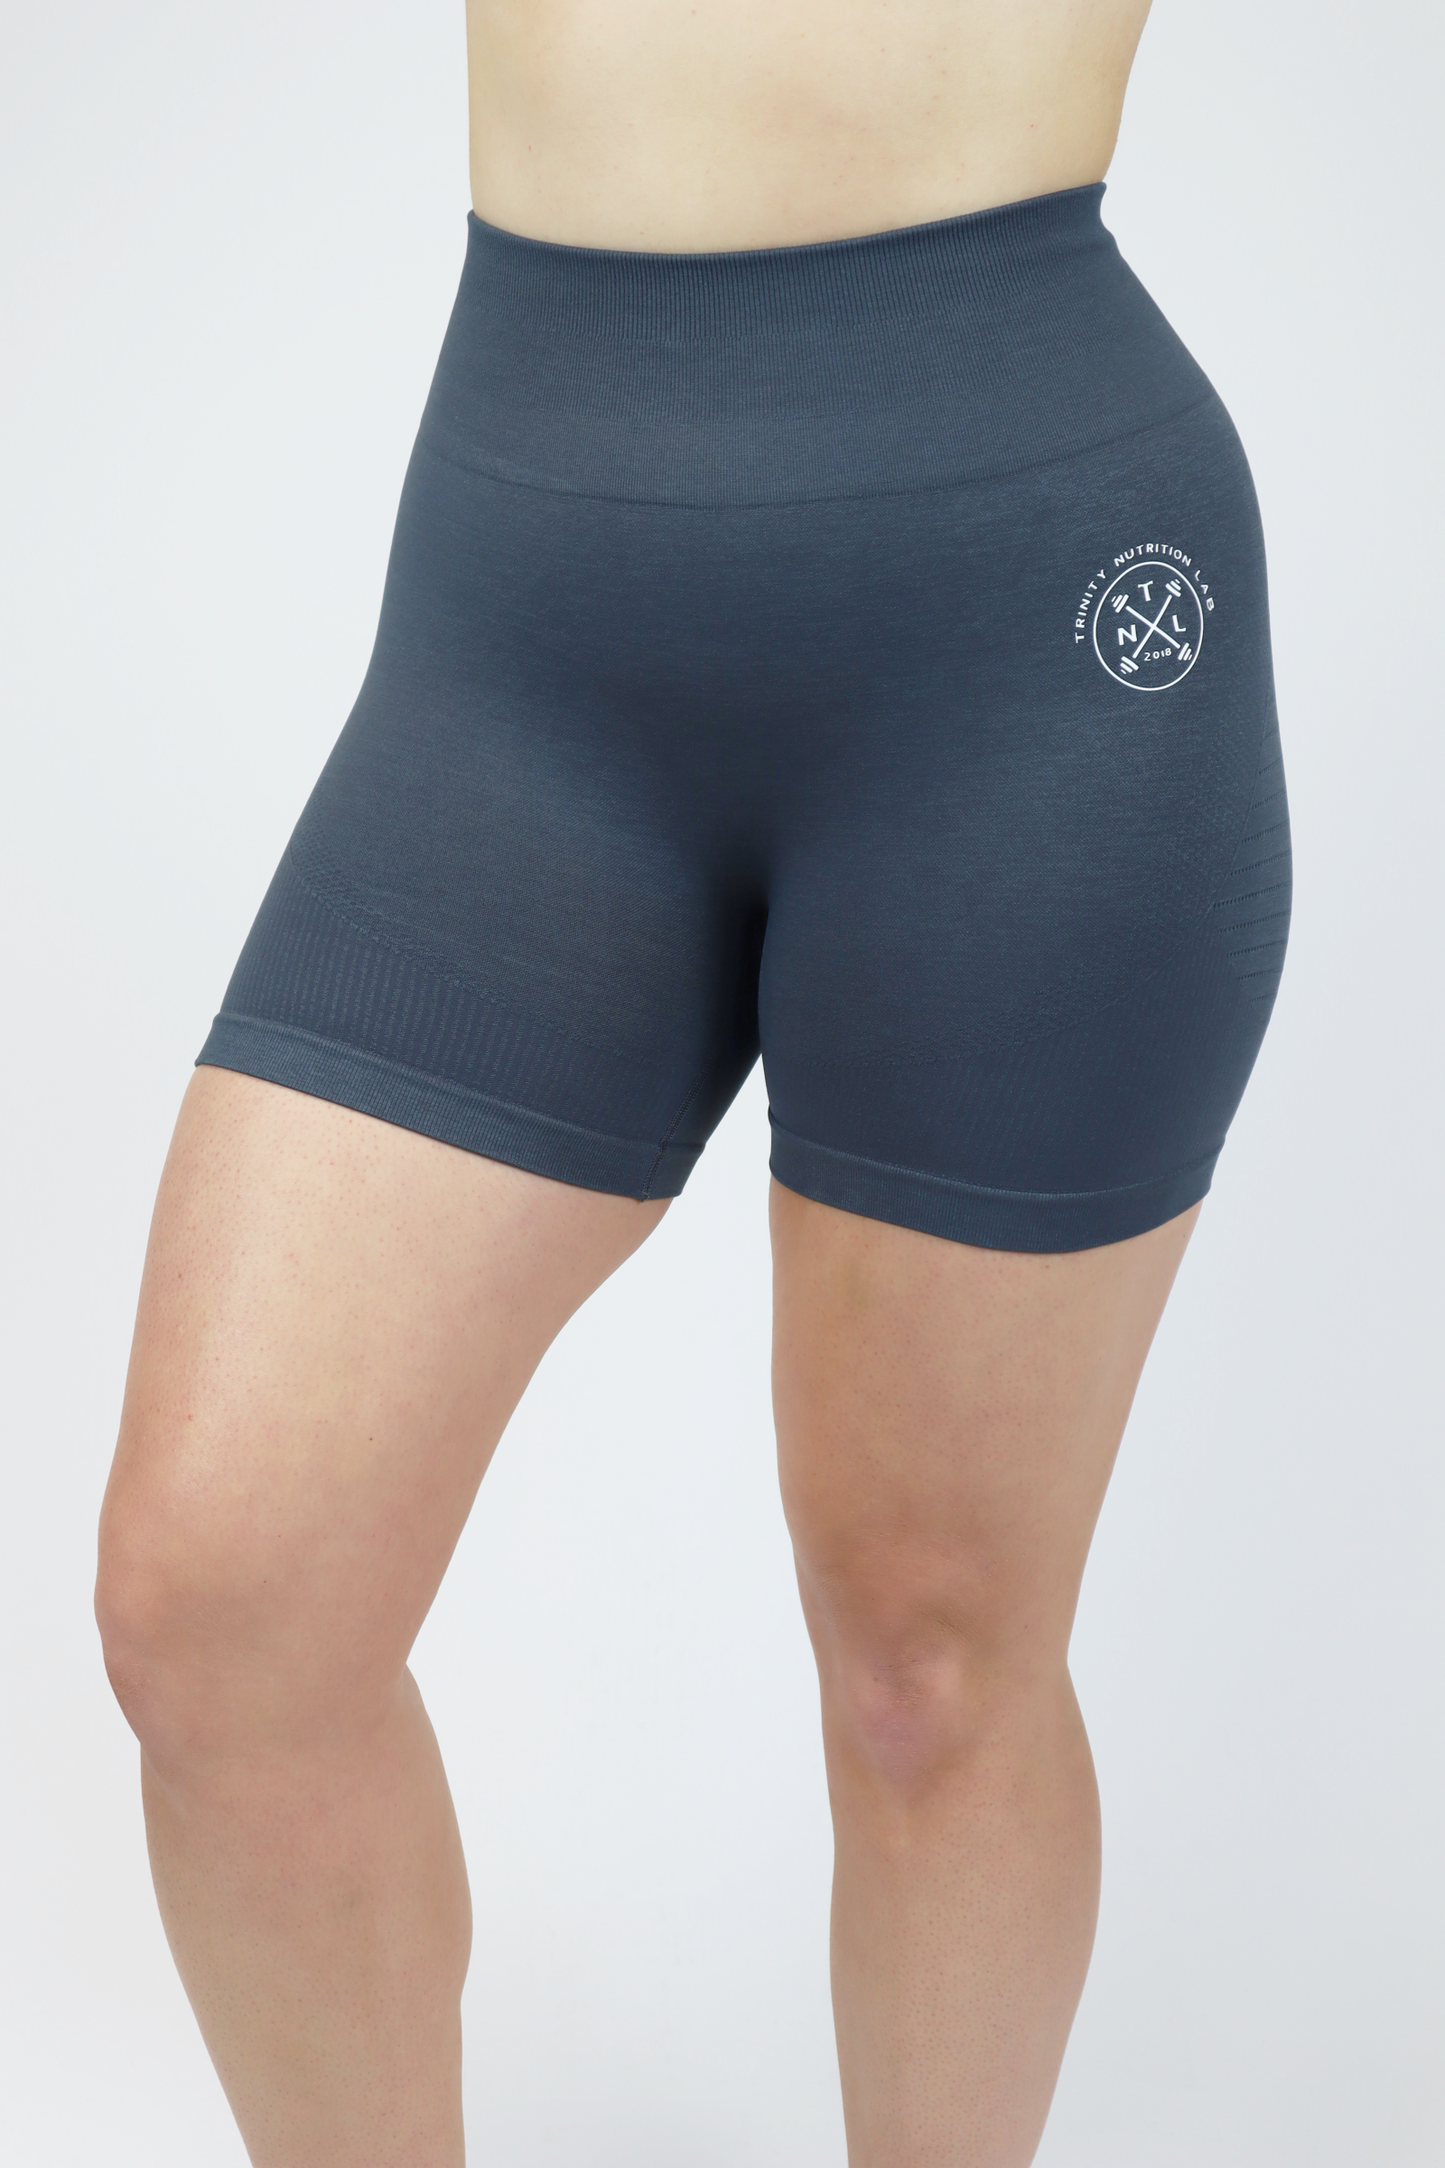 most comfortable shorts for a workout or hangout